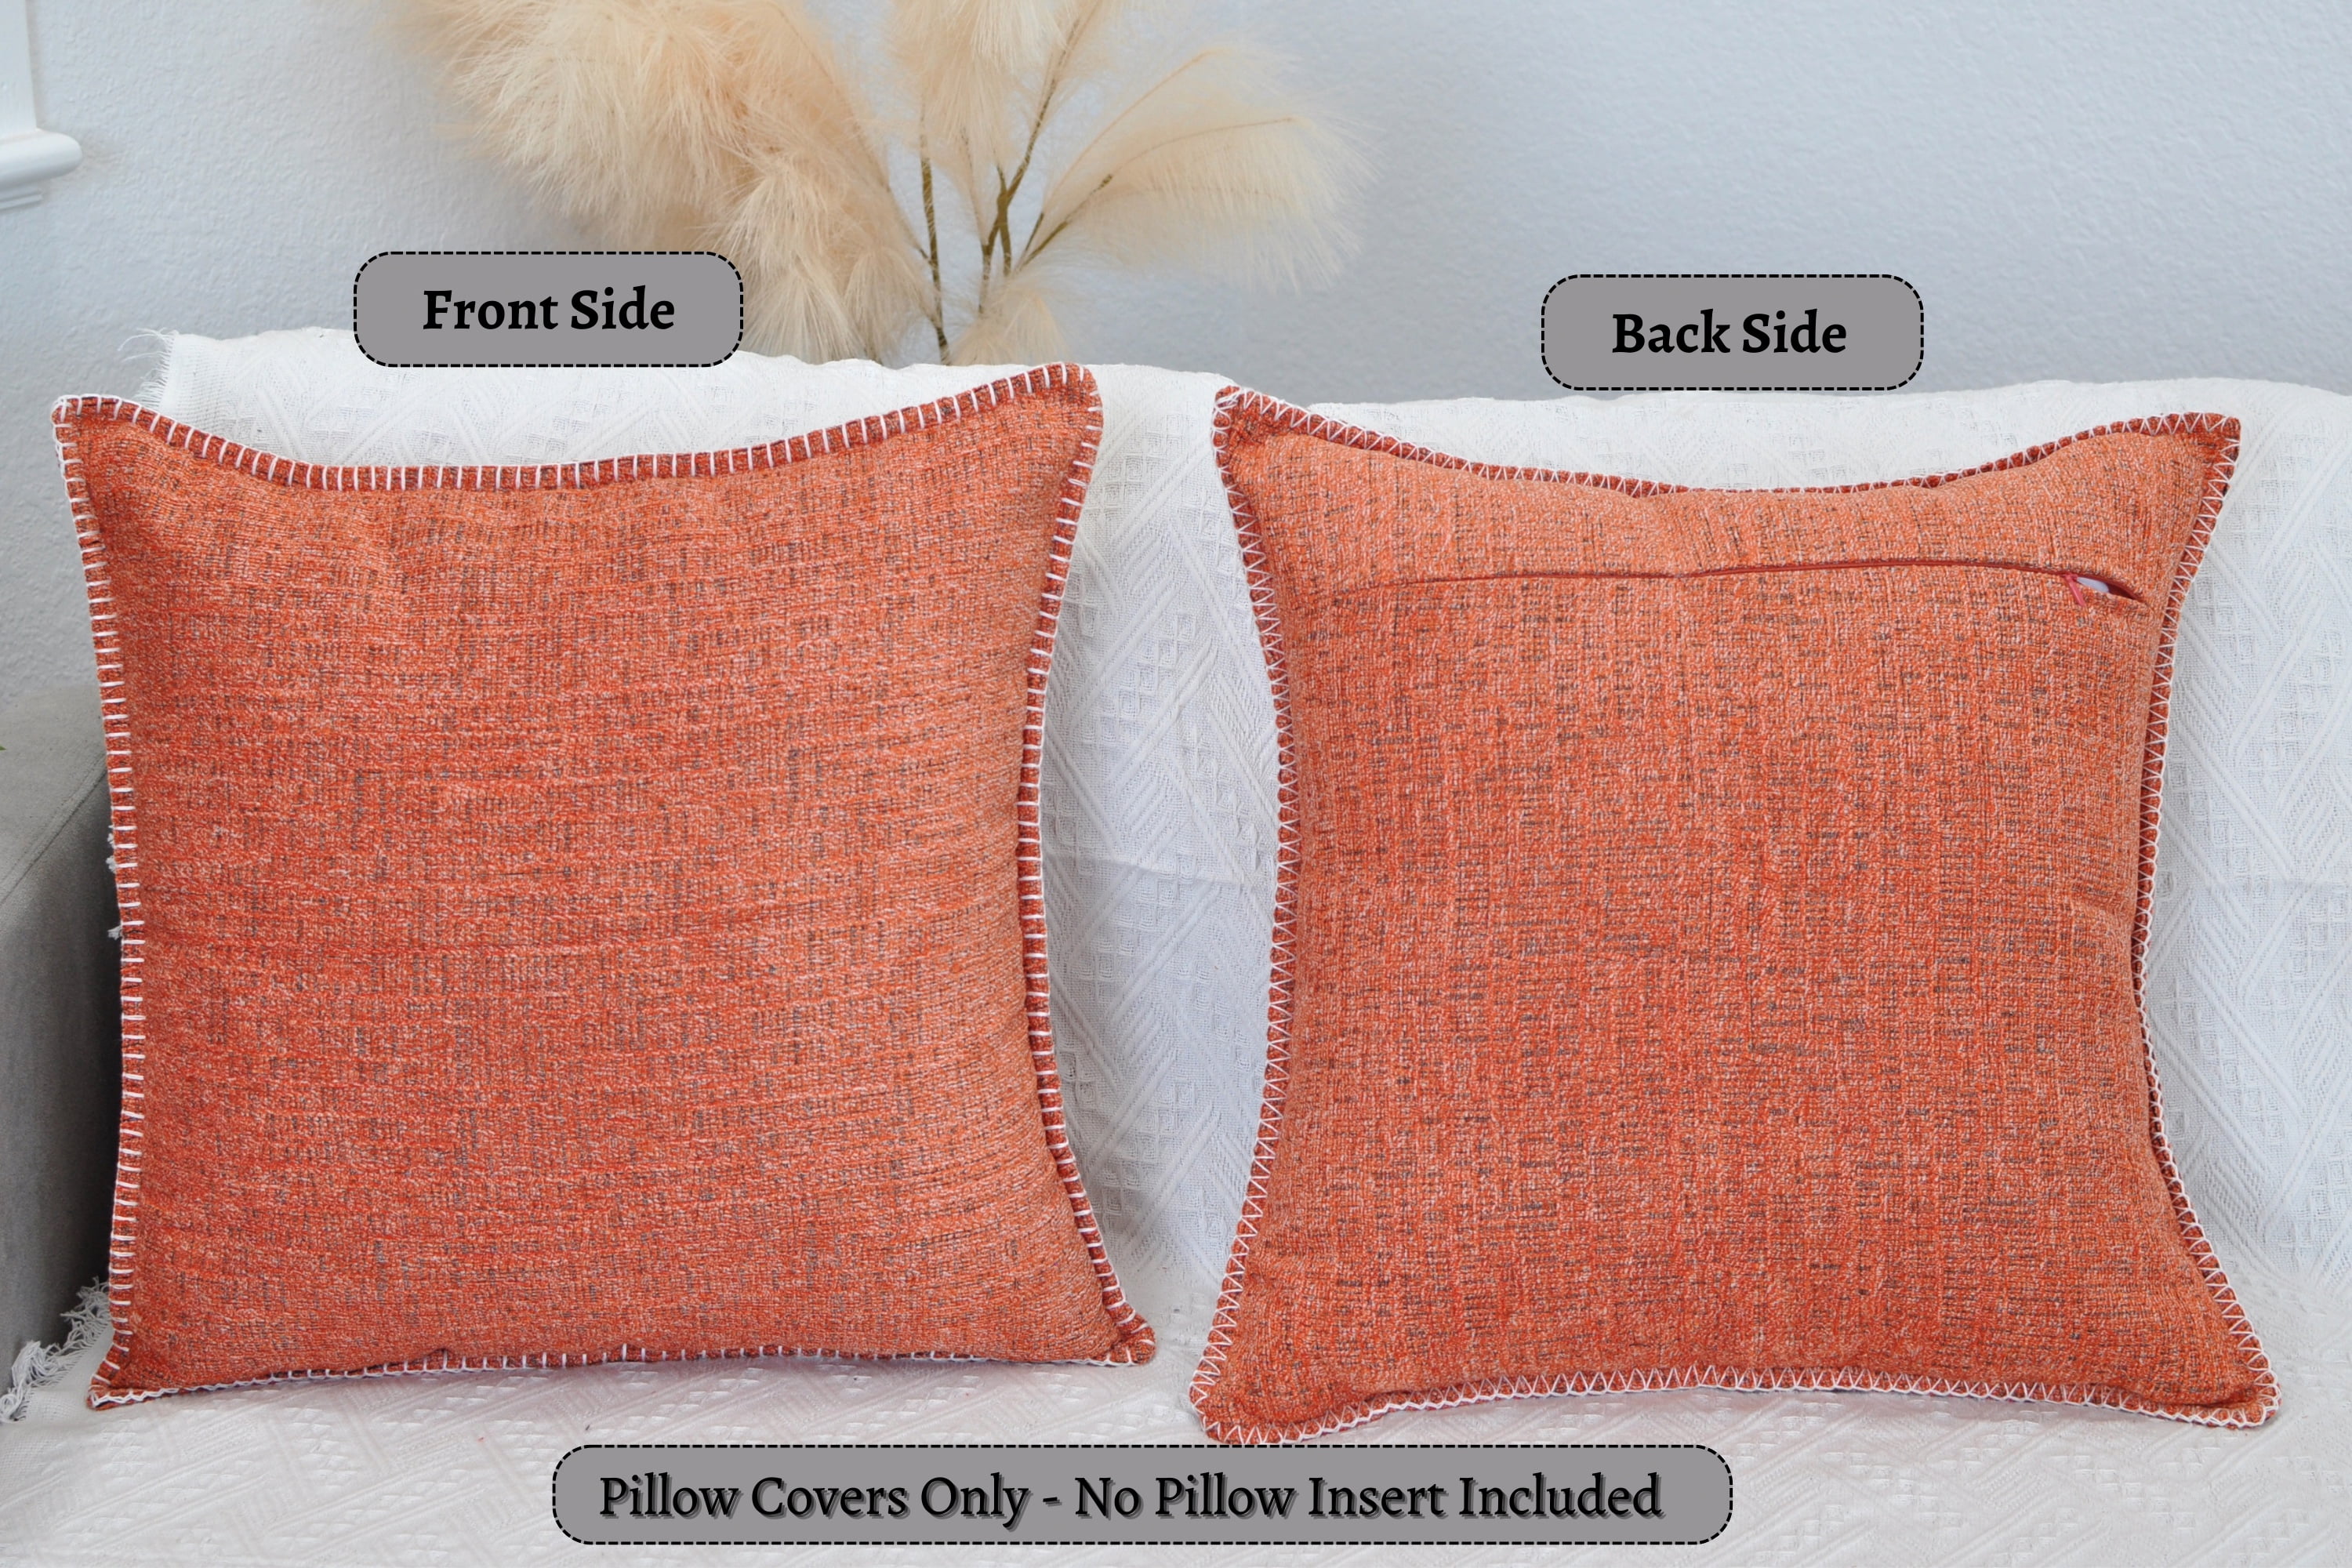 Stitched Edge Modern Textured Pillow Covers Set of 2 (26 x 26 inch